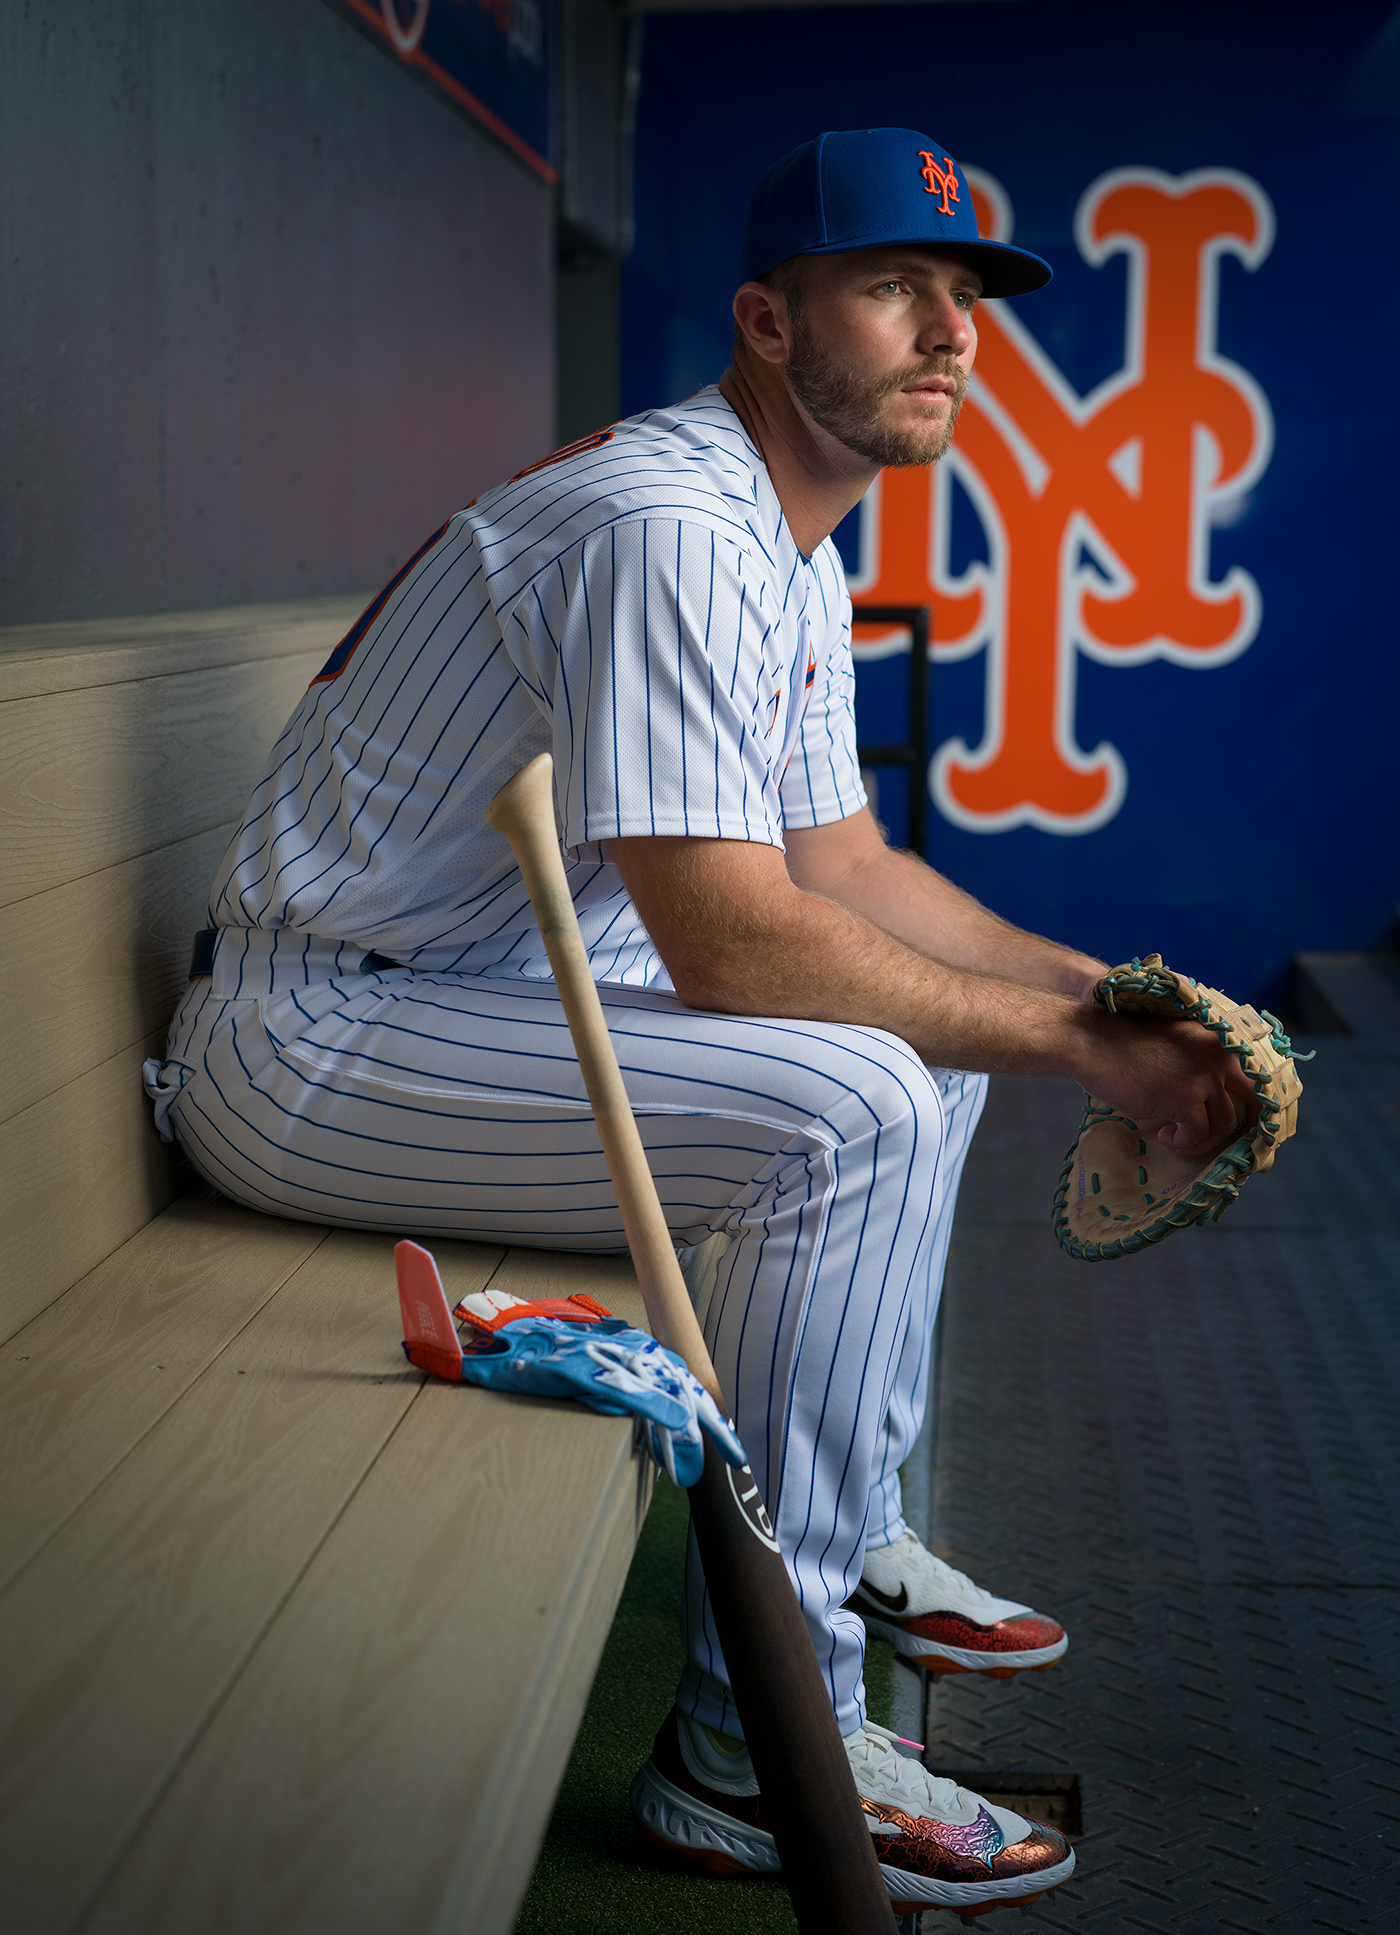 sports photographer Photography  portrait citi Advertising  Advertising Photography Major league baseball Mets nymets